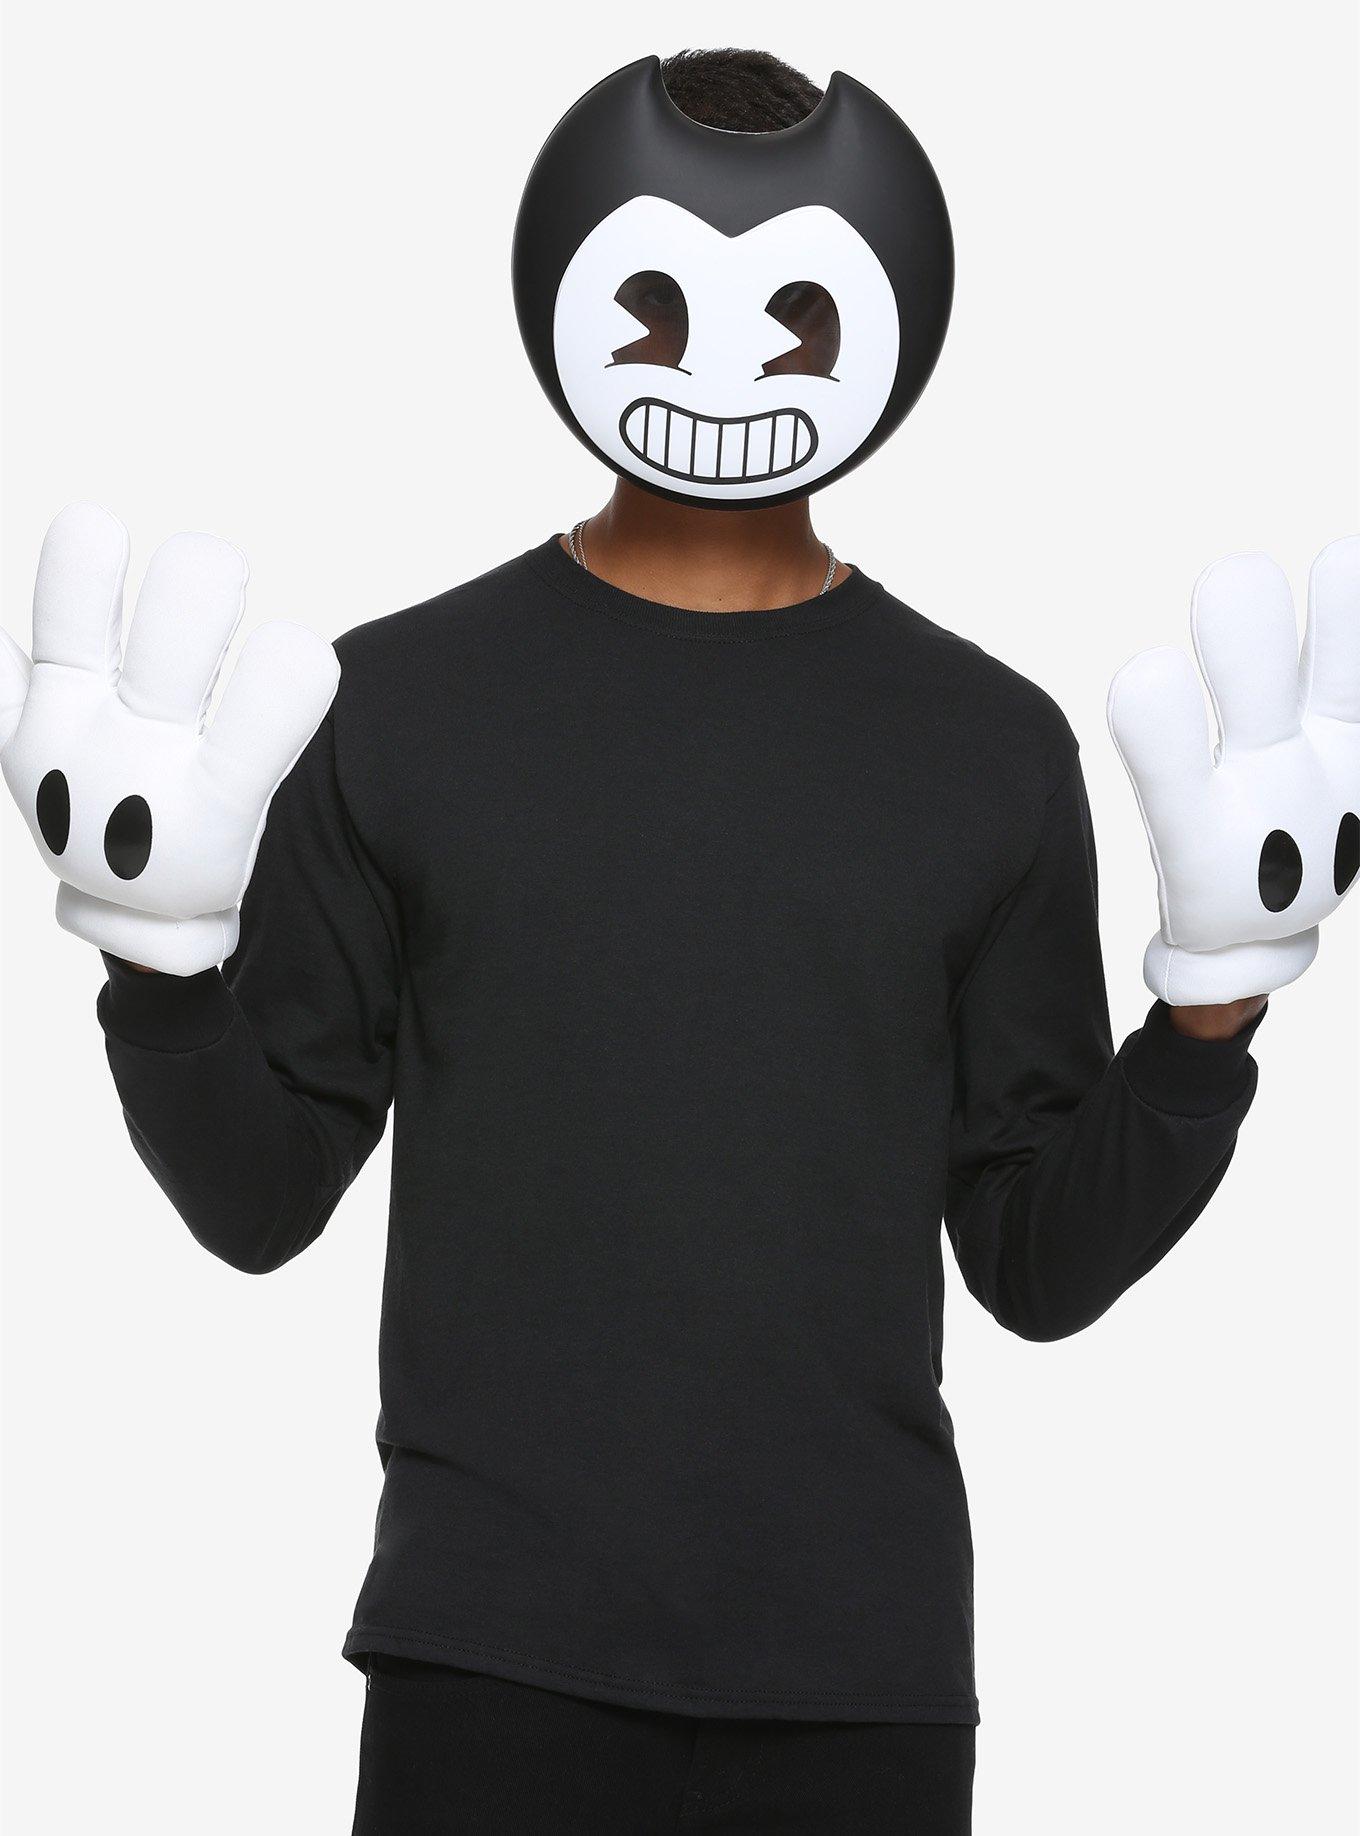 Bendy from Bendy and the Ink Machine Costume, Carbon Costume